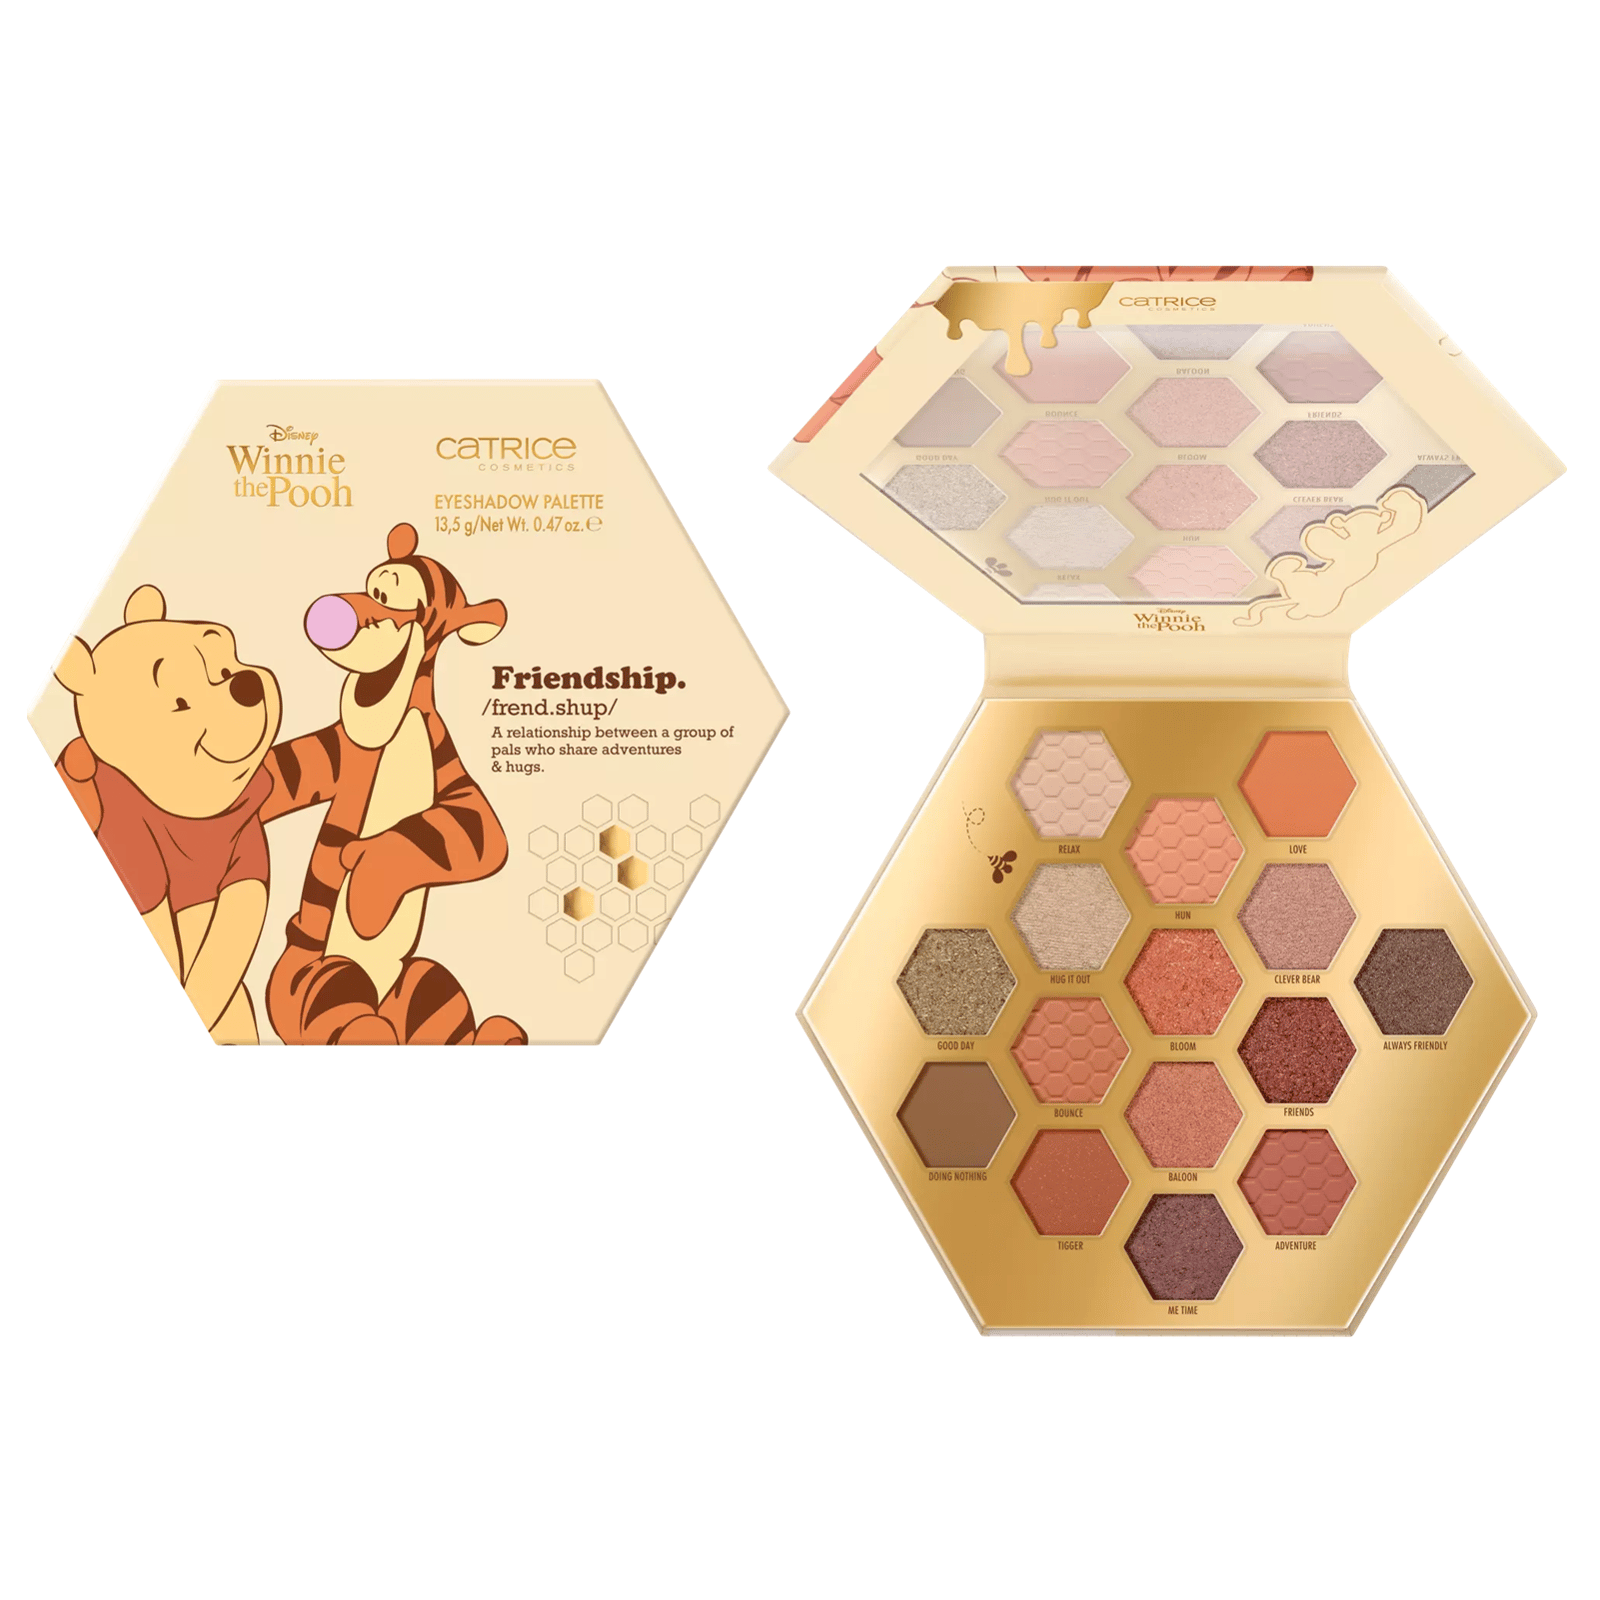 Catrice Disney Winnie The Pooh Eyeshadow Palette 030 It's a Good Day To Have a Good Day 13.5g